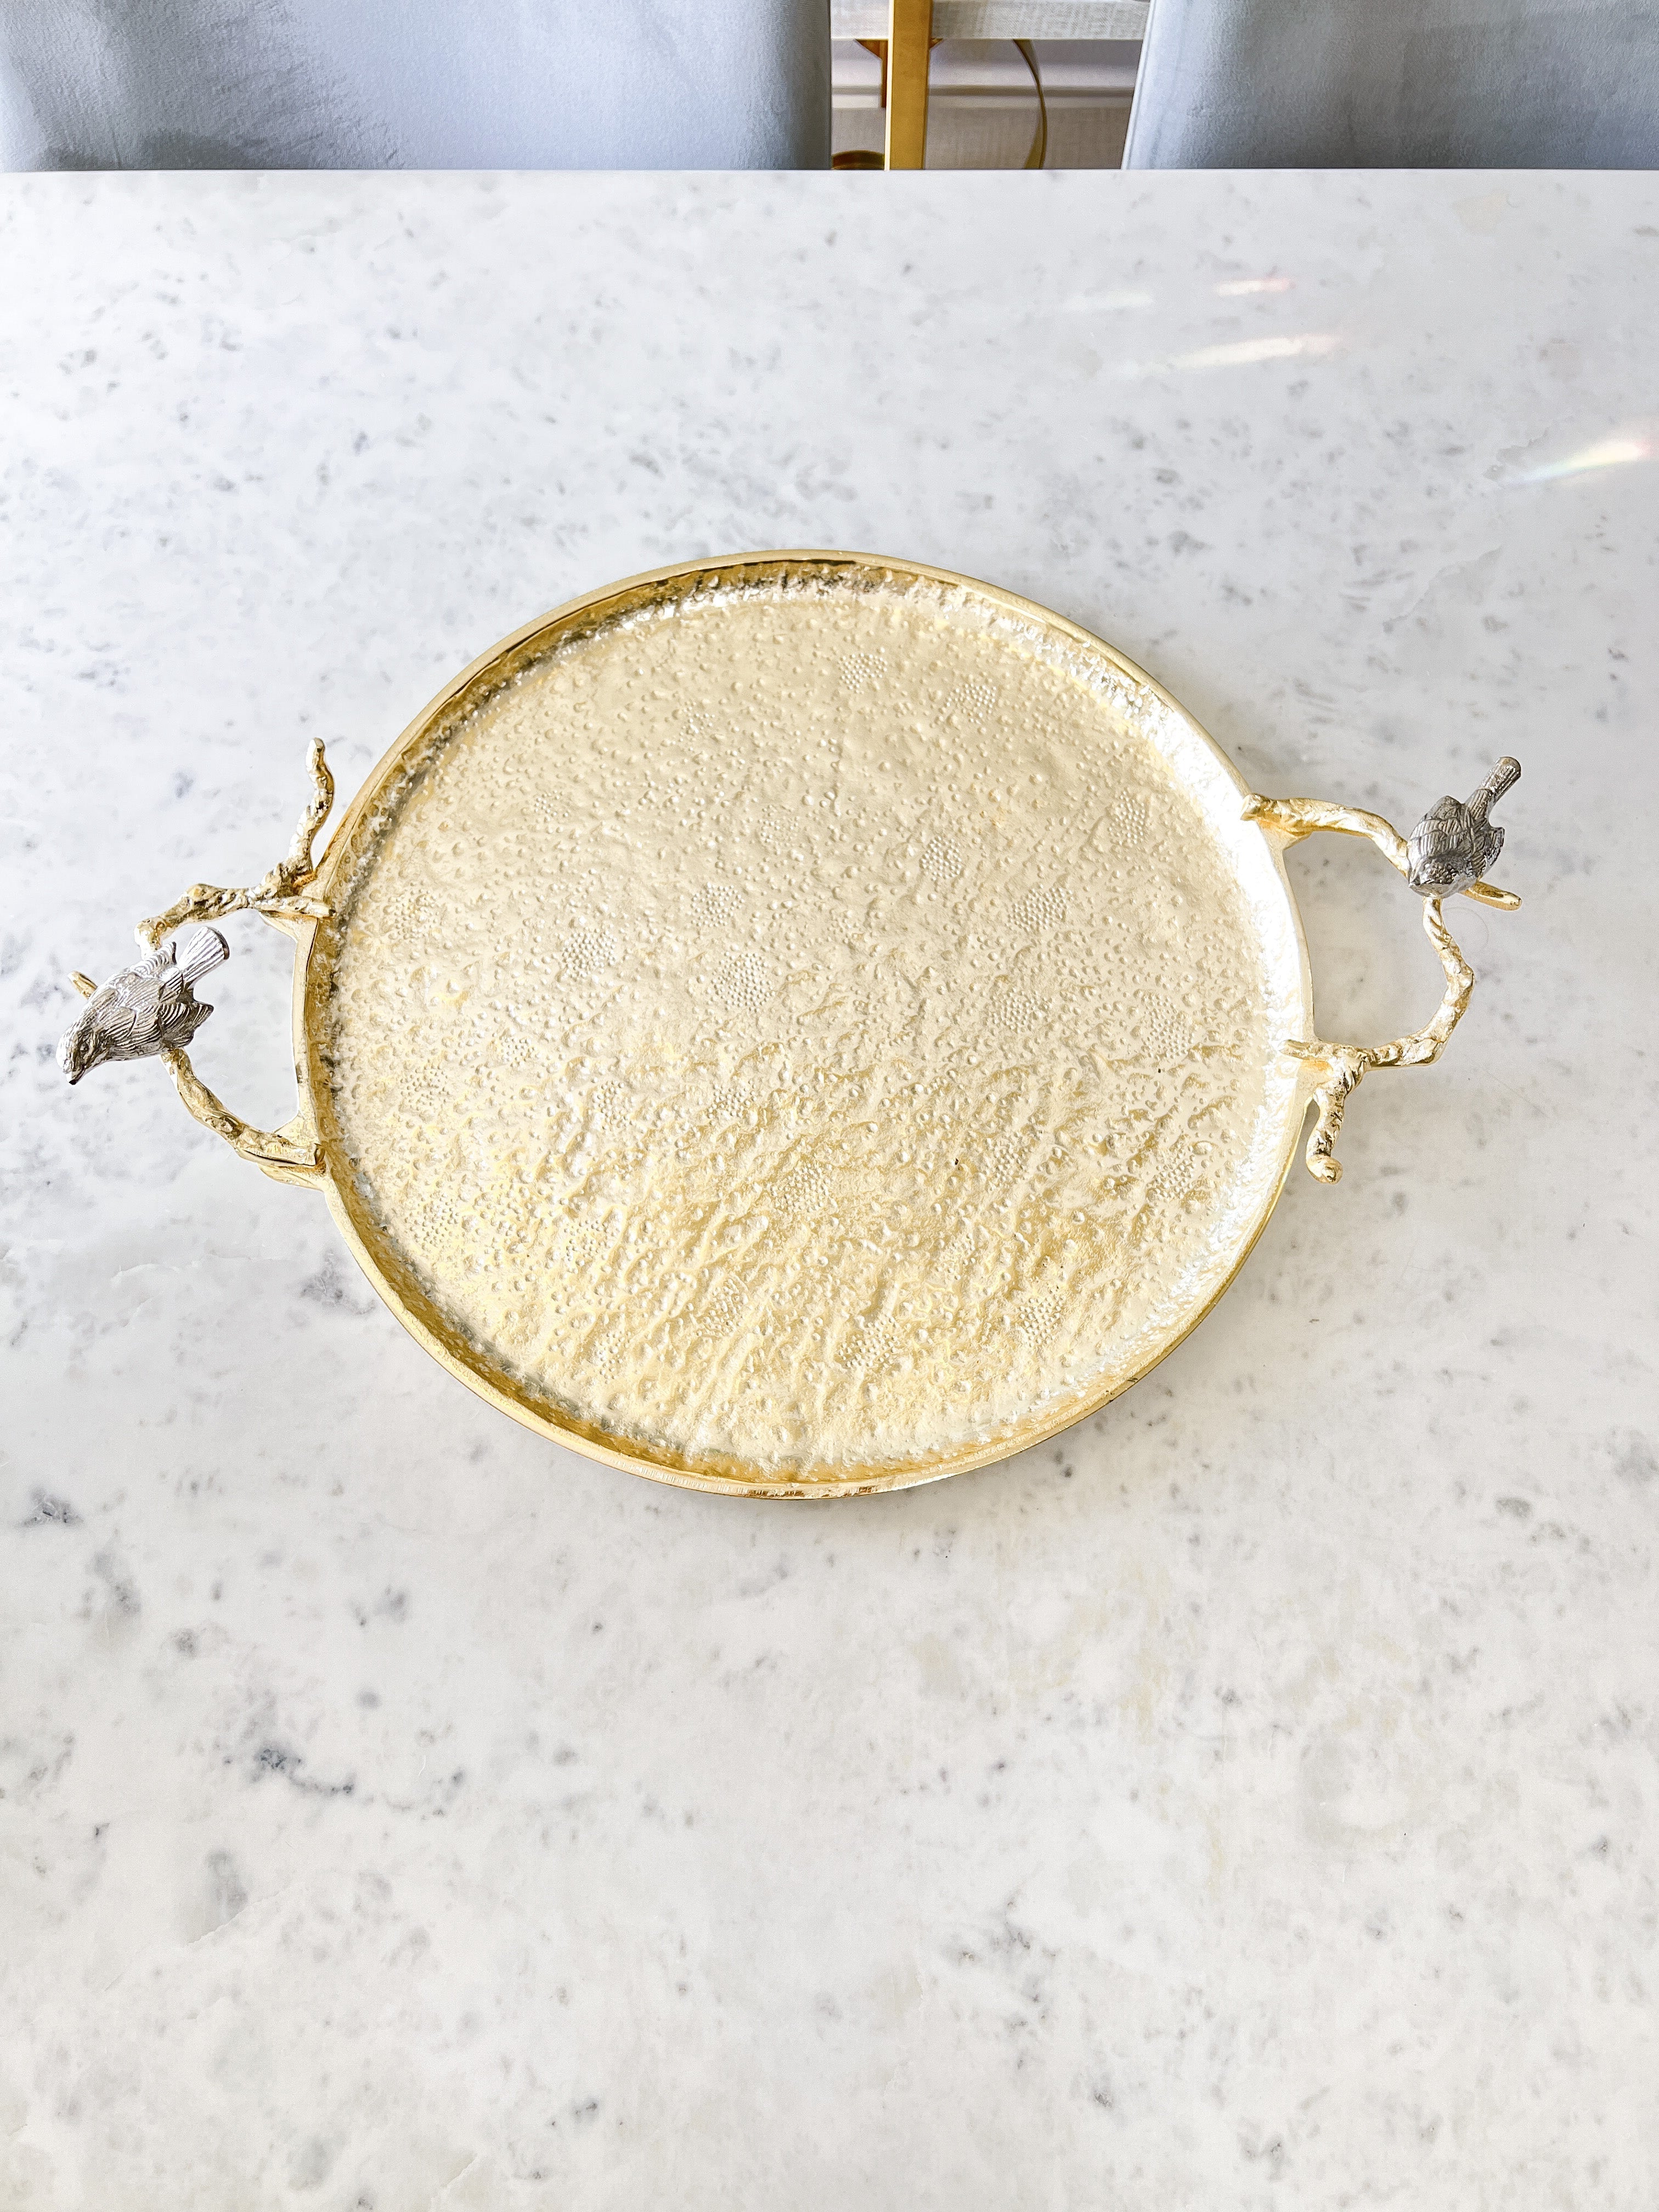 Gold Hammered Round Tray with Bird Details - HTS HOME DECOR